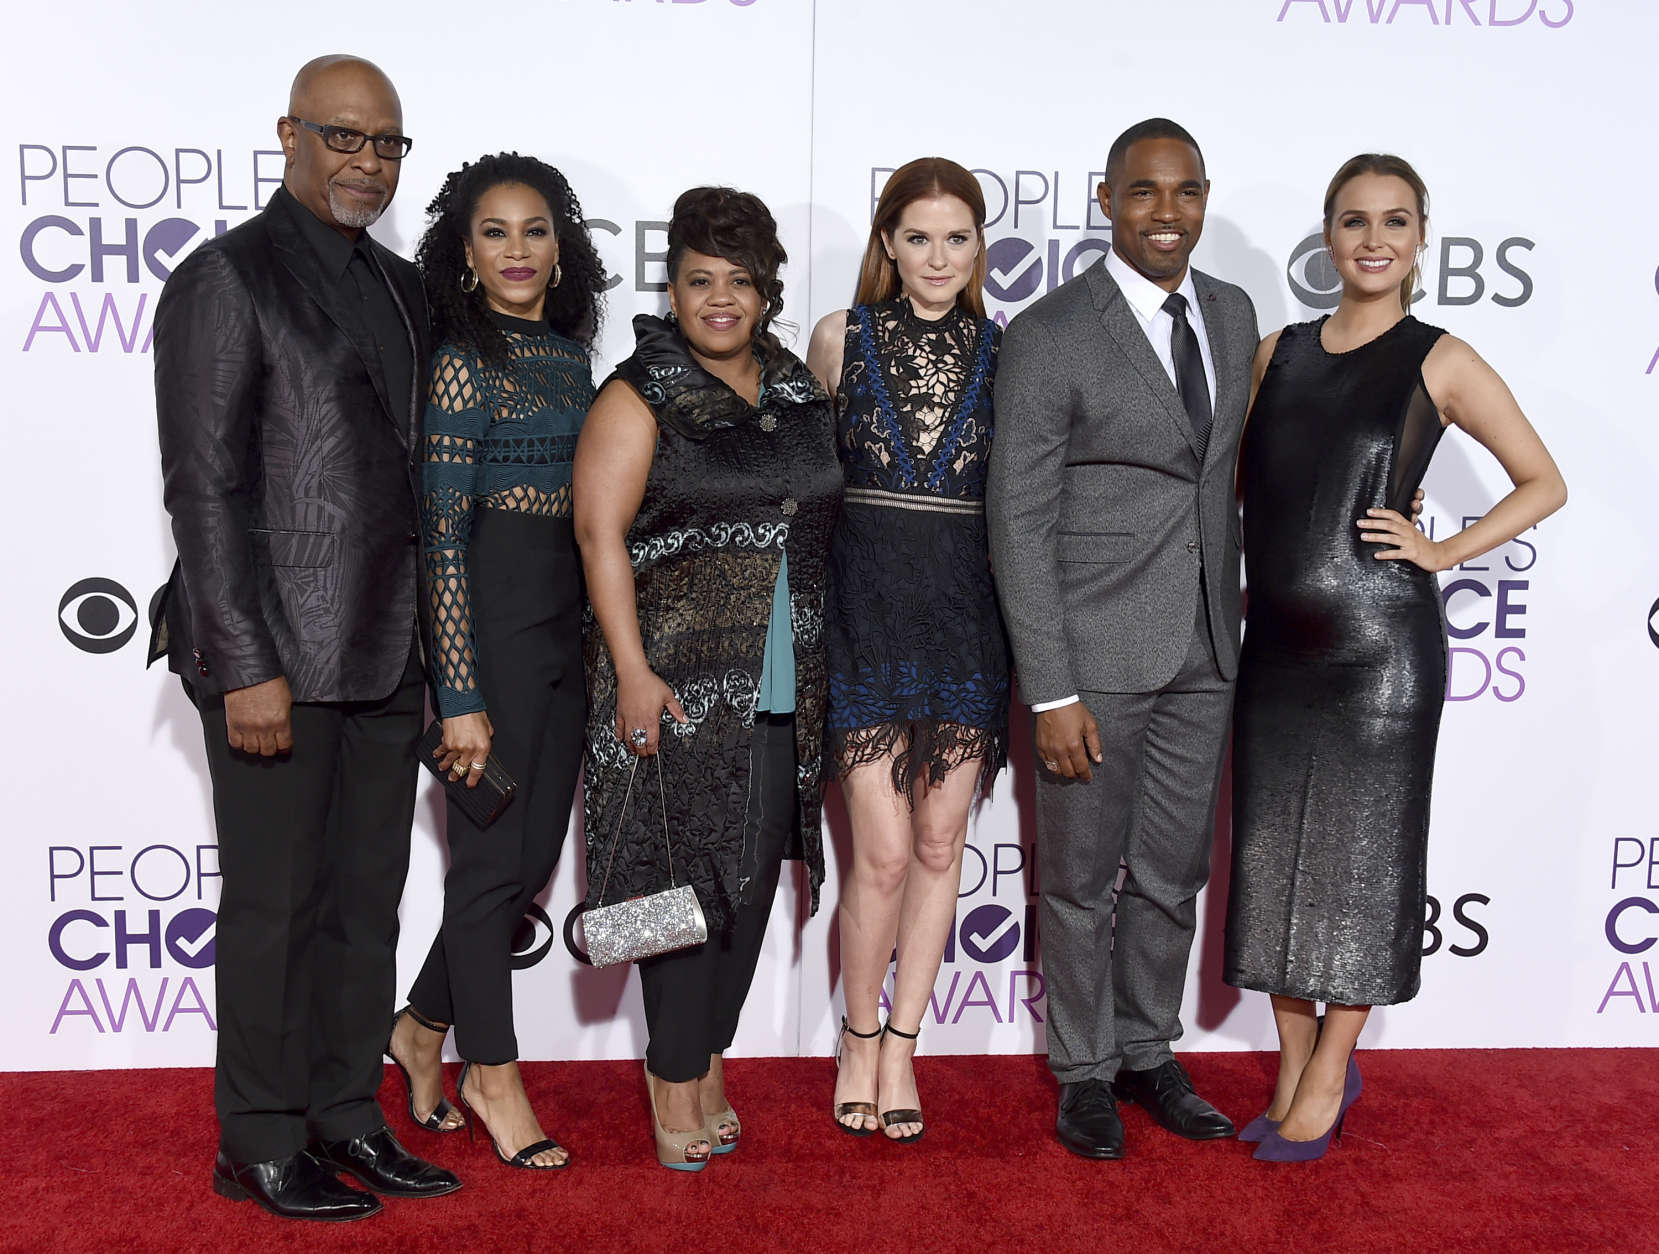 James Pickens Jr., from left, Kelly McCreary, Chandra Wilson, Sarah Drew, Jason George, and Camilla Luddington arrives at the People's Choice Awards at the Microsoft Theater on Wednesday, Jan. 18, 2017, in Los Angeles. (Photo by Jordan Strauss/Invision/AP)